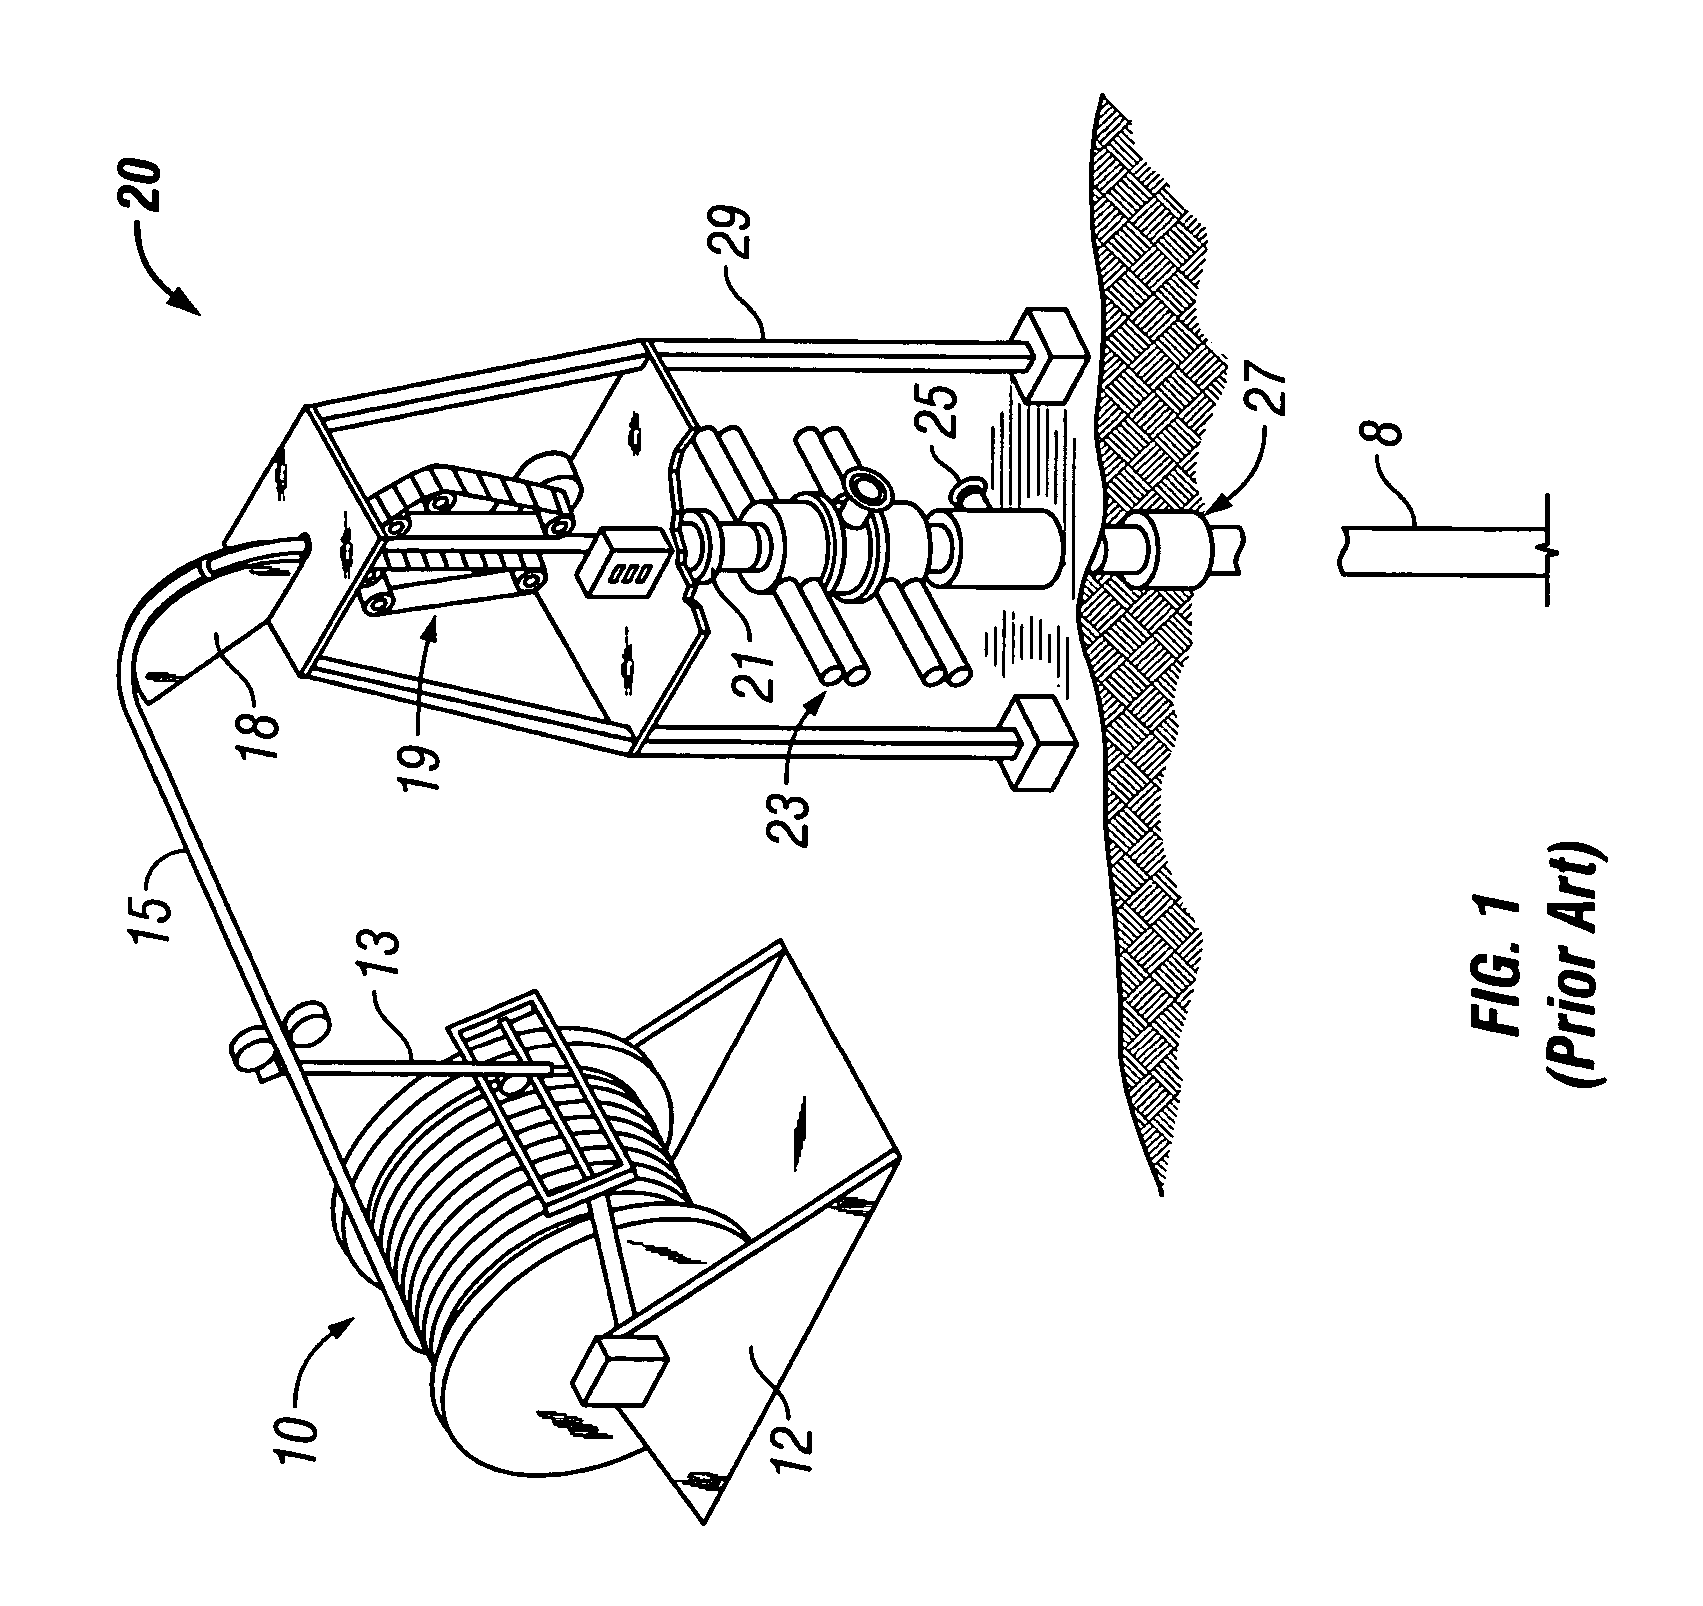 Method and apparatus for deploying a line in coiled tubing